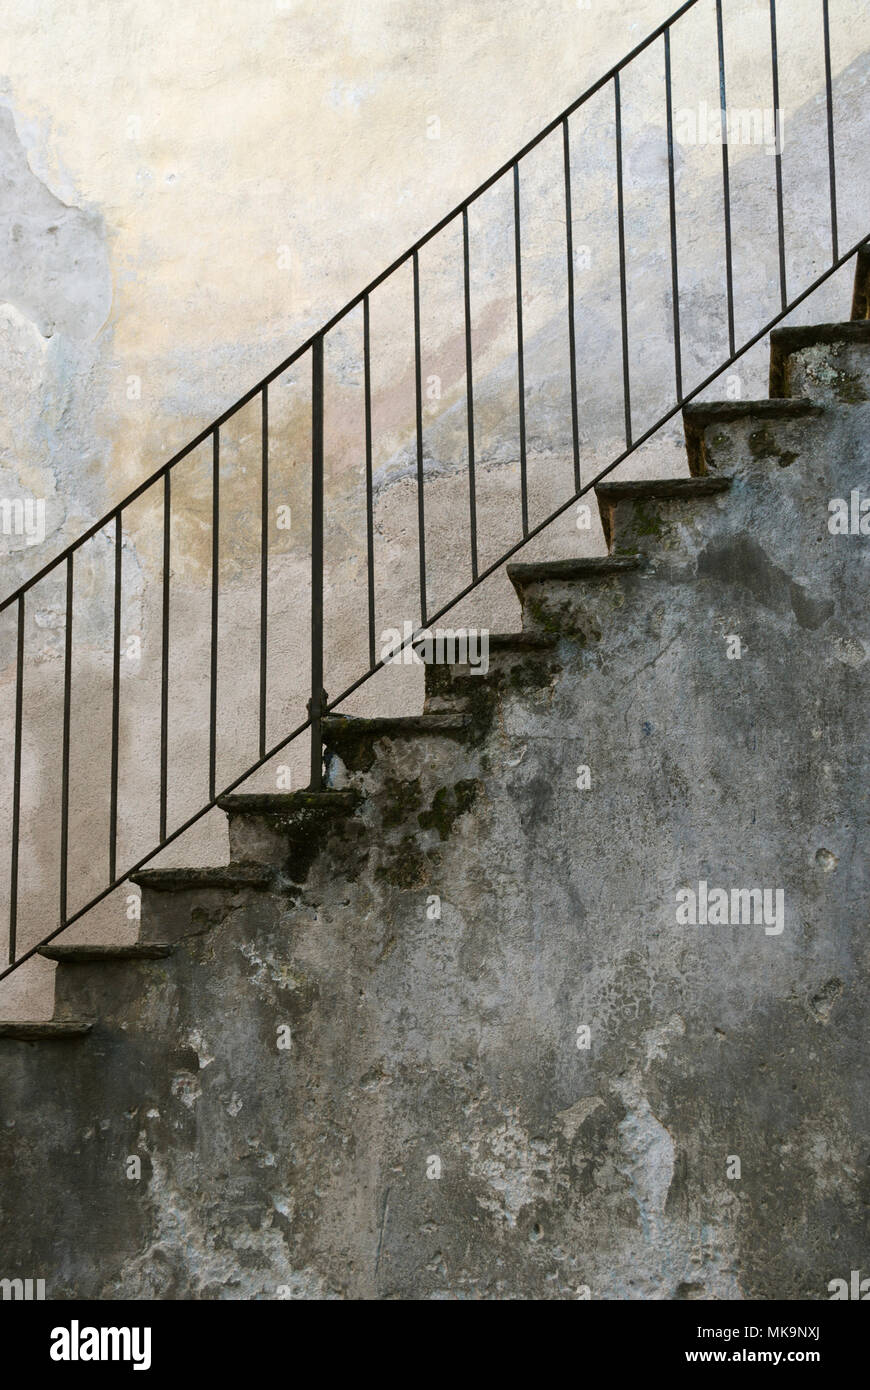 old exterior stone staircase with metal handrail Stock Photo